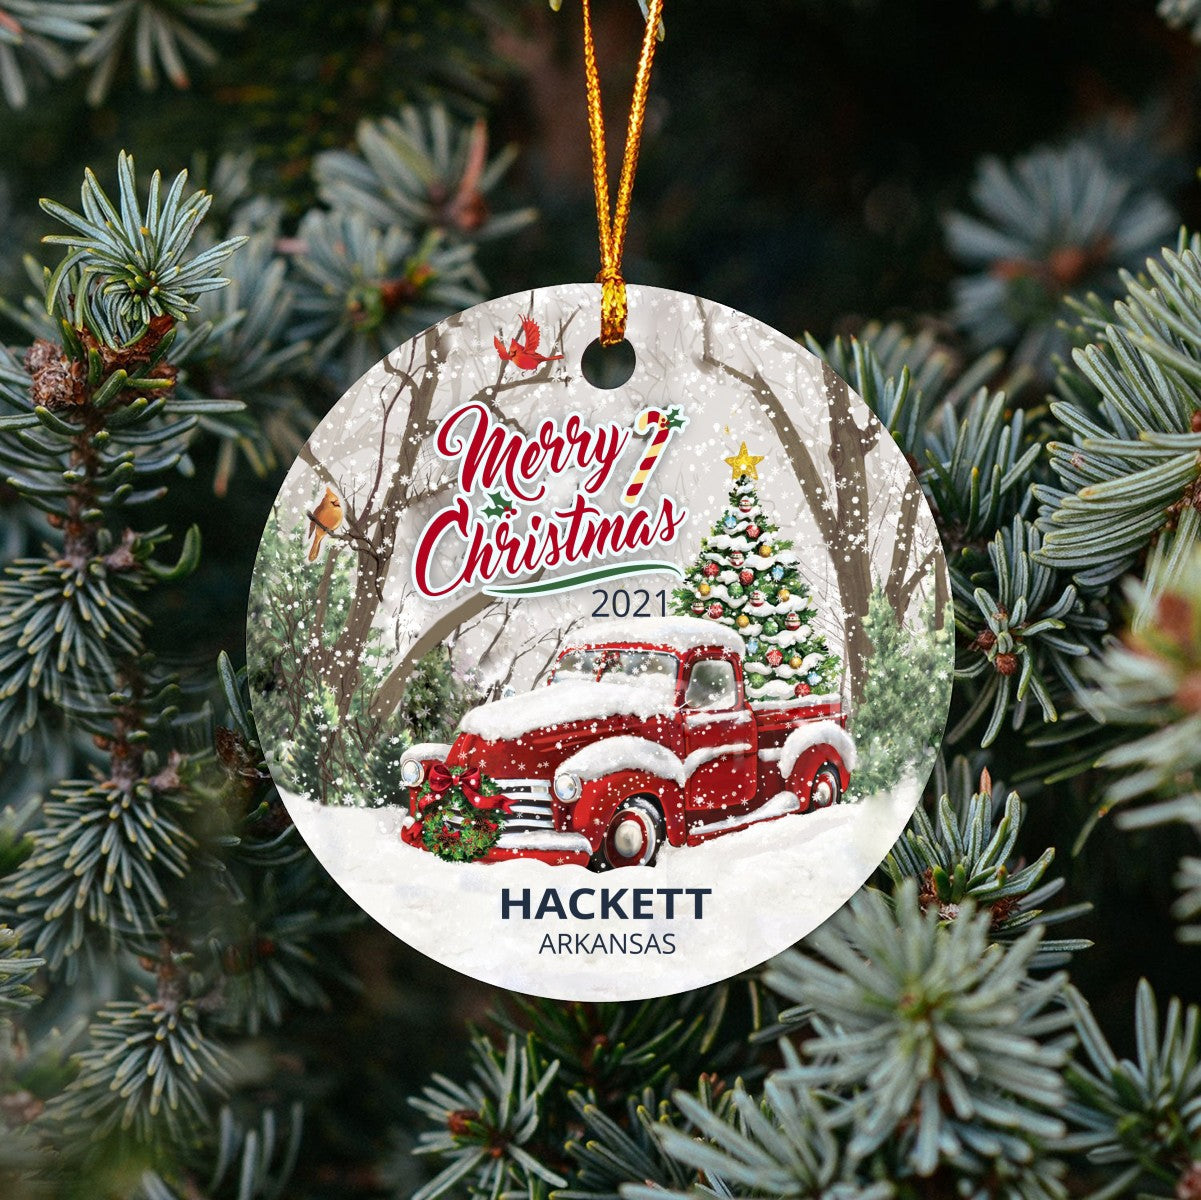 Christmas Tree Ornaments Hackett - Ornament With Name City, State Hackett Arkansas AR Ornament - Red Truck Xmas Ornaments 3'' Plastic Gift For Family, Friend And Housewarming